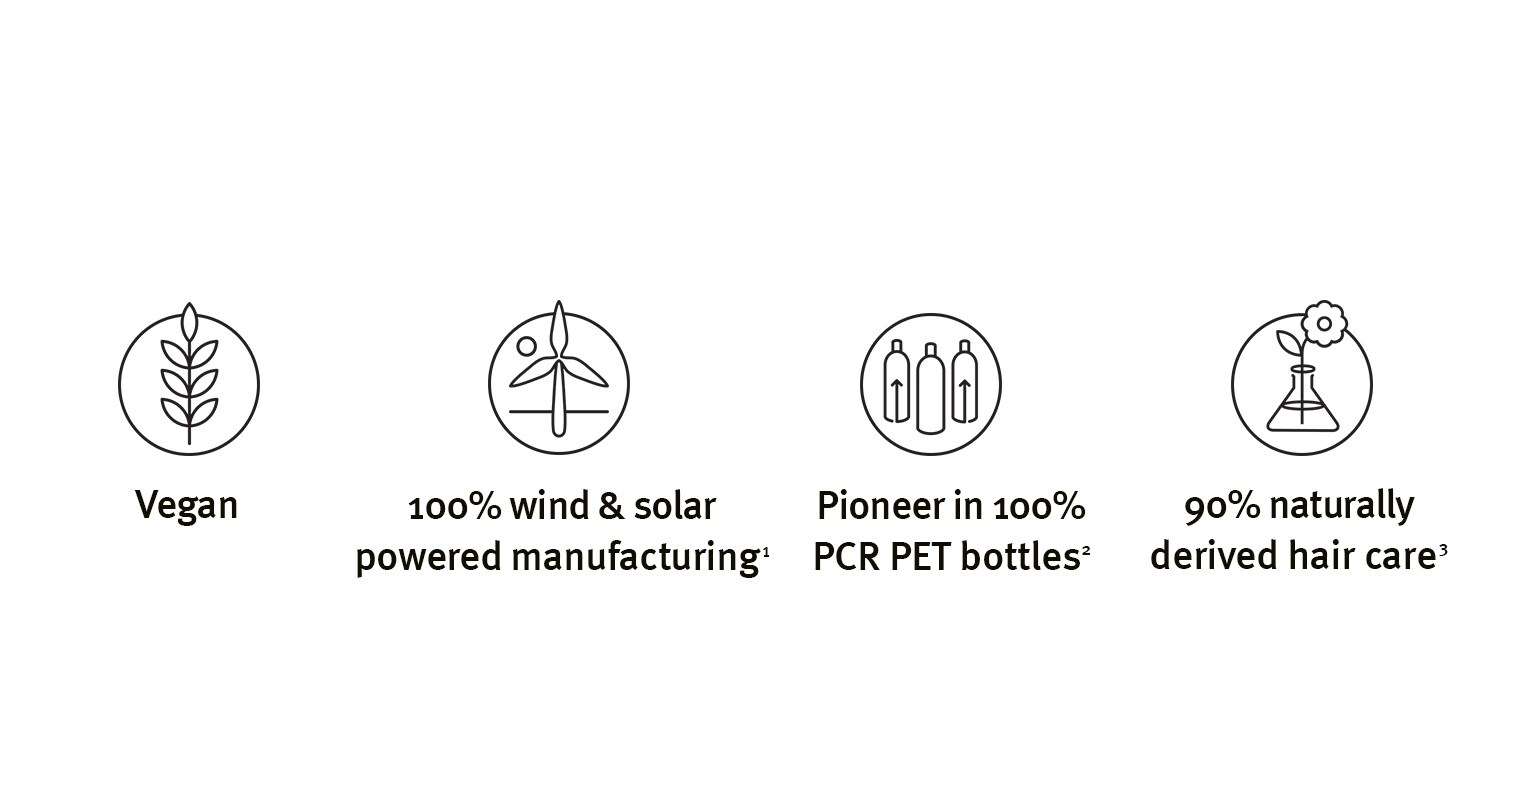 Aveda is vegan, 90% naturally derived, wind & solar powered and 100% PCR PET bottles.